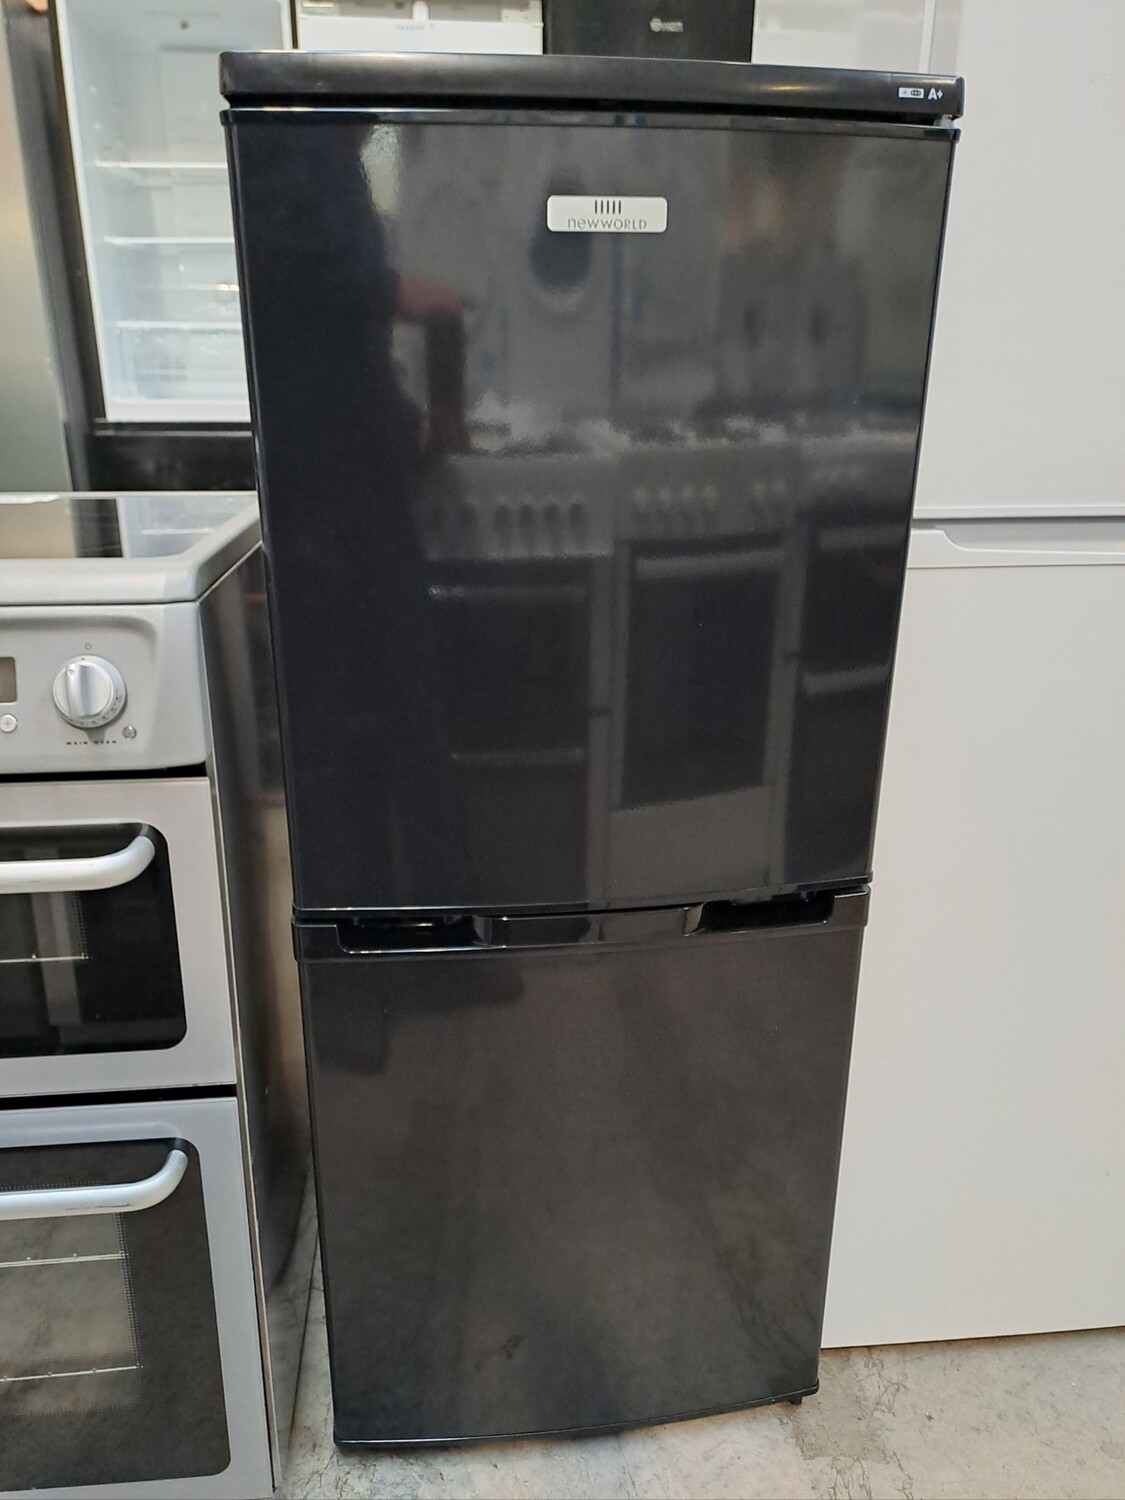 New World NWCOM5012 Fridge Freezer Black - H124 x W50 X D55  Brand New Graded 12 Month Guarantee. This item is located in our Whitby Road Shop 